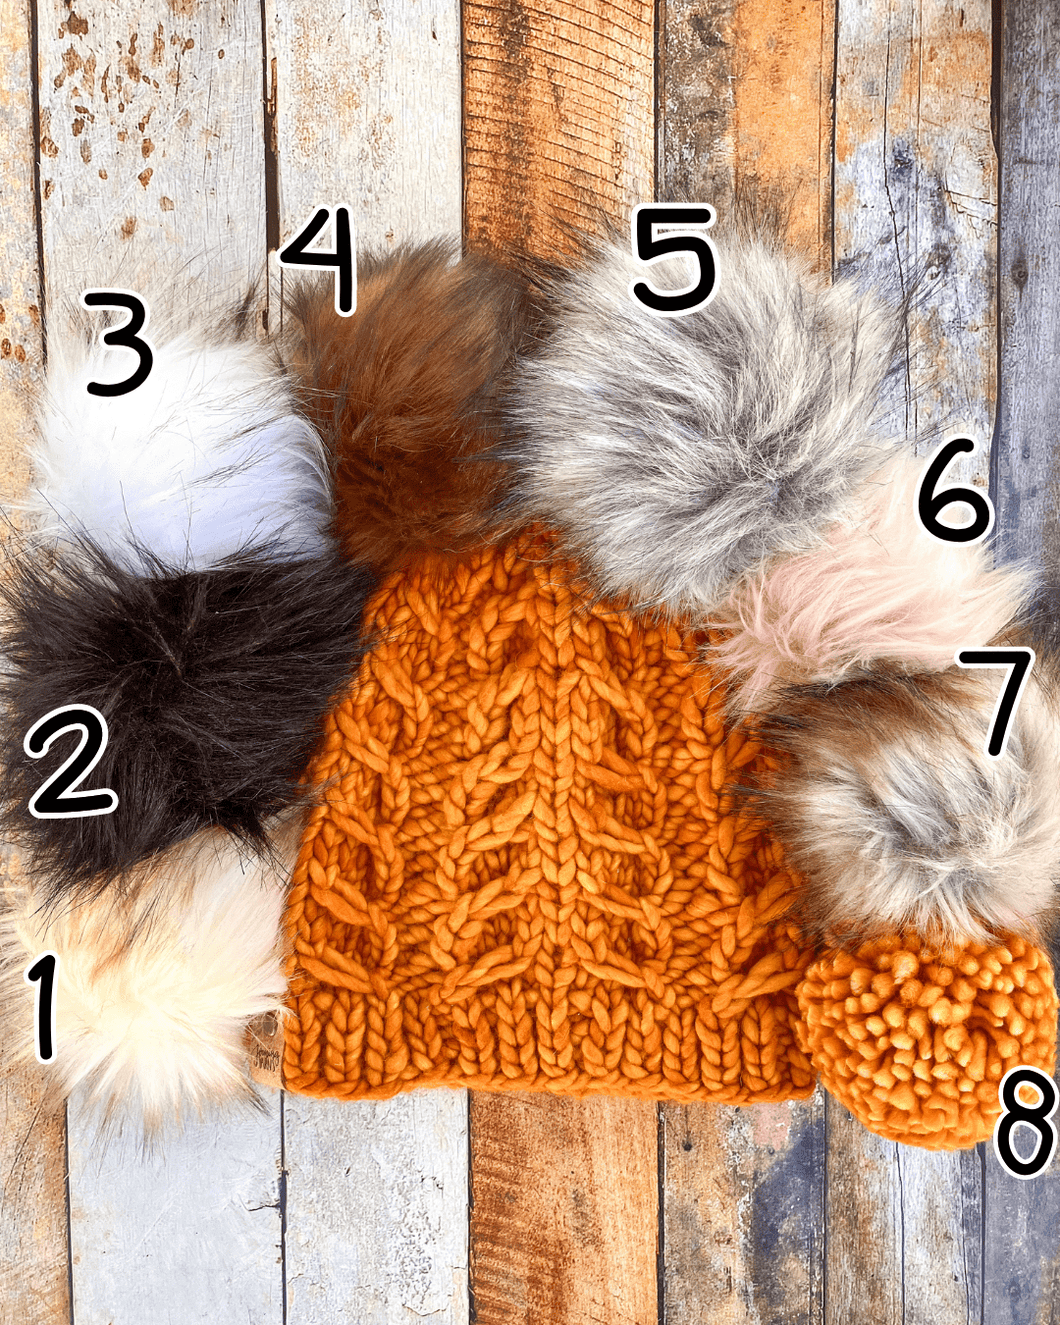 Fossil Beanie in orange showing all pom options:  cream, black, white, brown, gray/black, pink, gray, matching yarn.  It is shown in a flat lay against a wooden background.